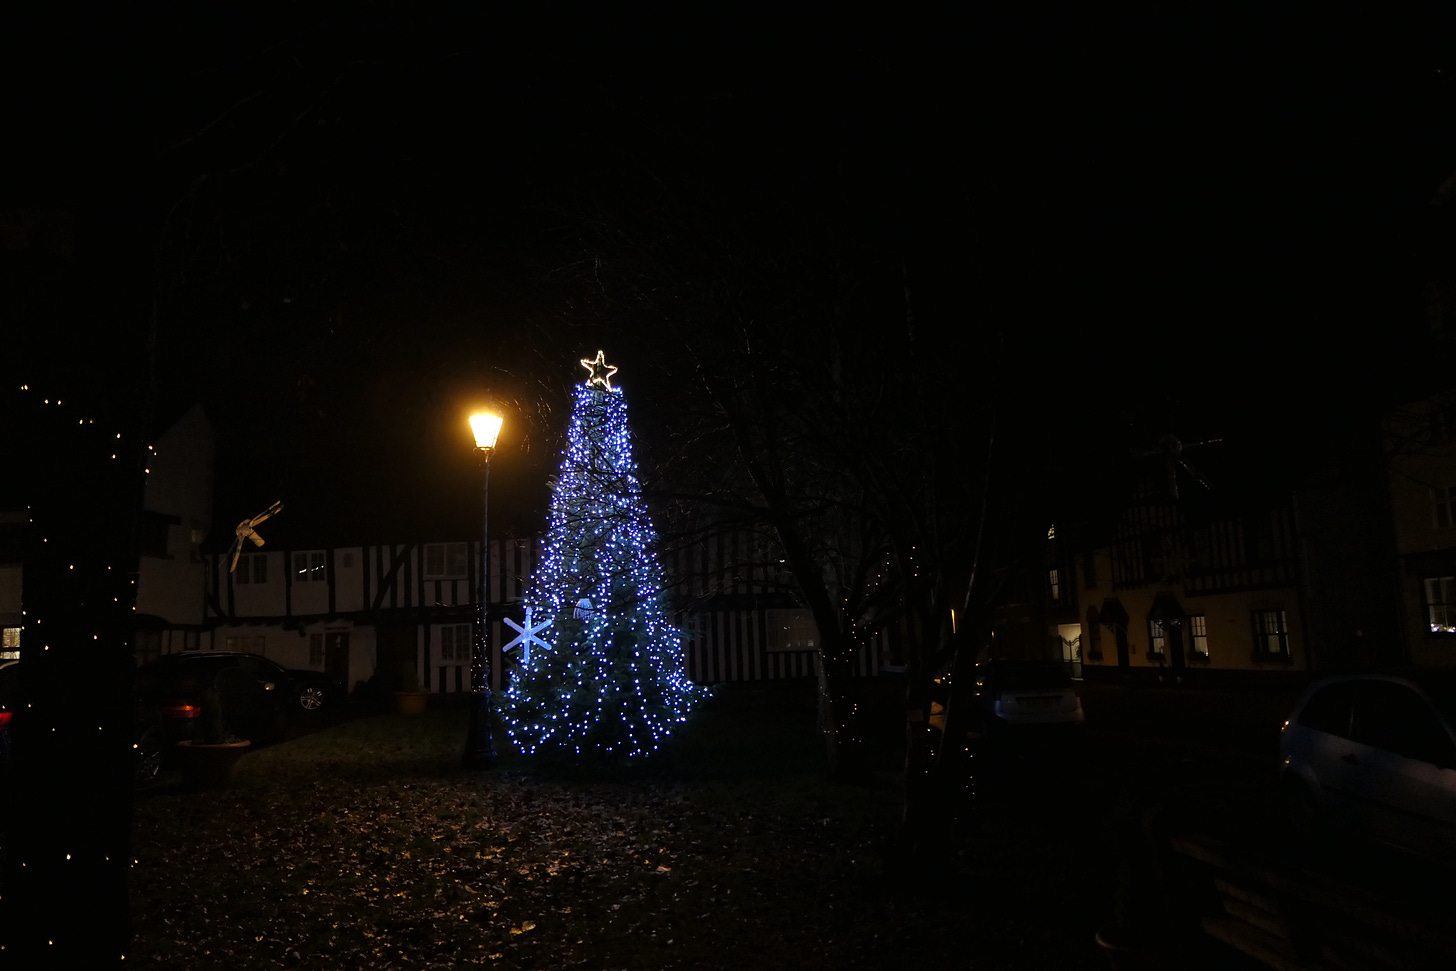 Dunchurch Christmas tree, December 2020 (c) South Rugby News